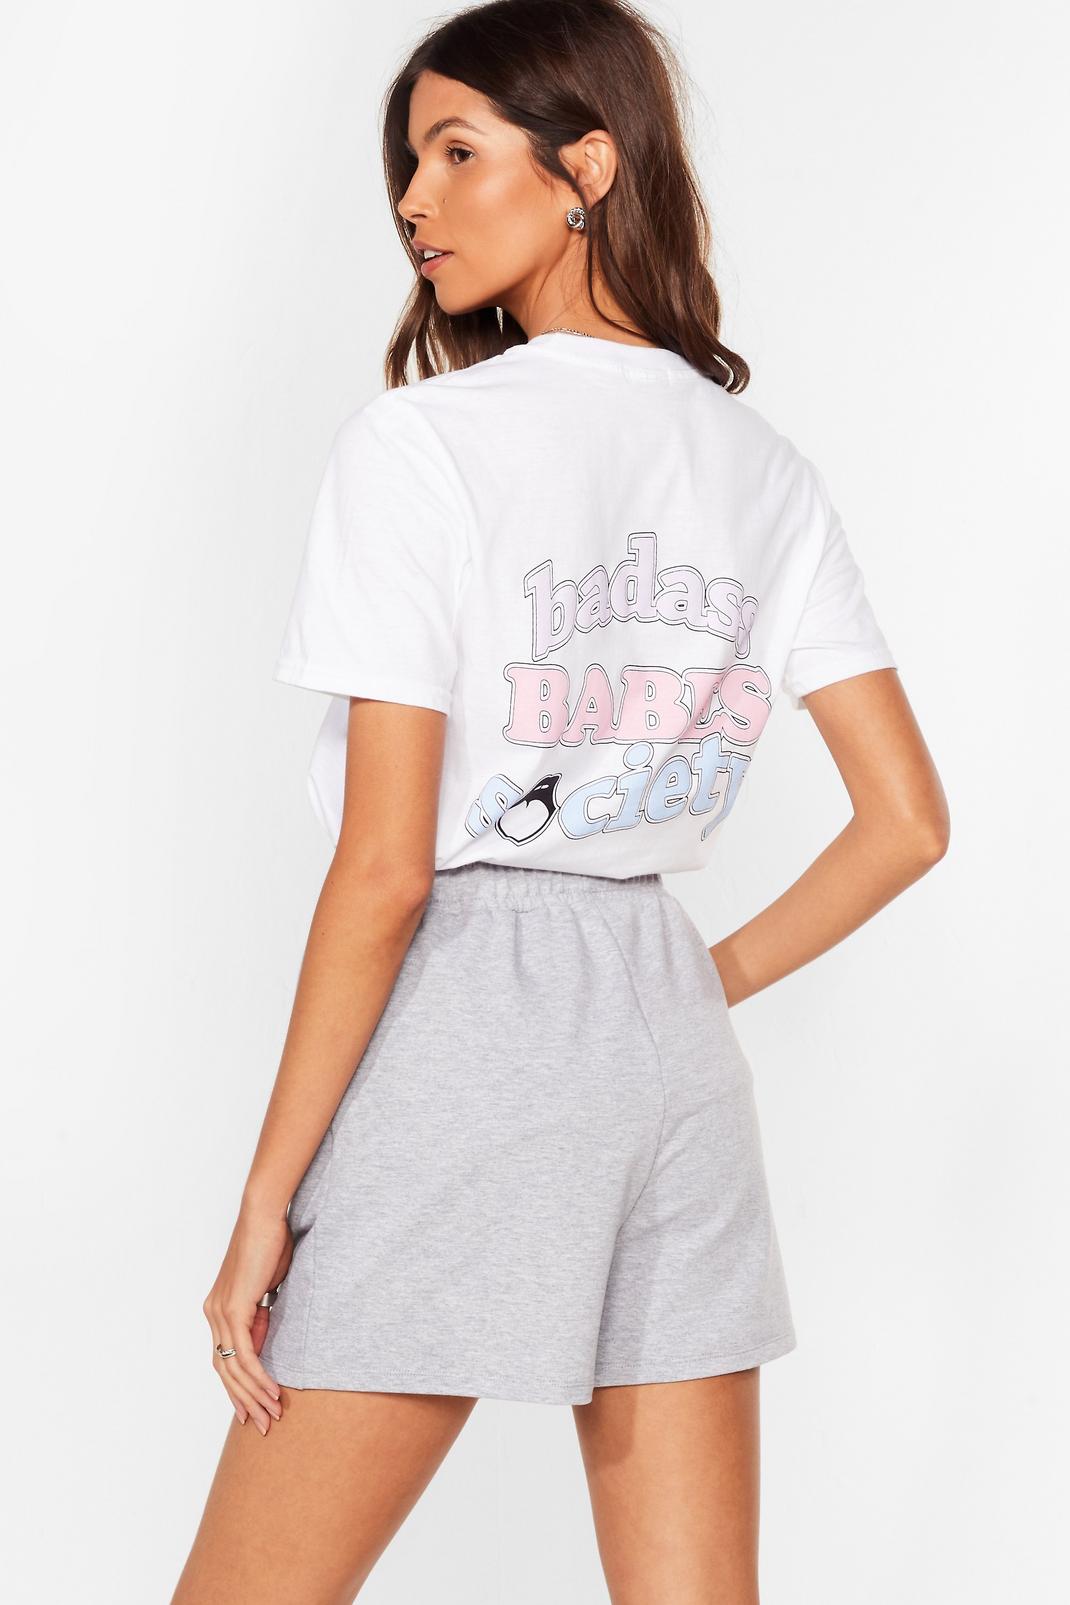 White Badass Babes Society Relaxed Graphic Tee image number 1